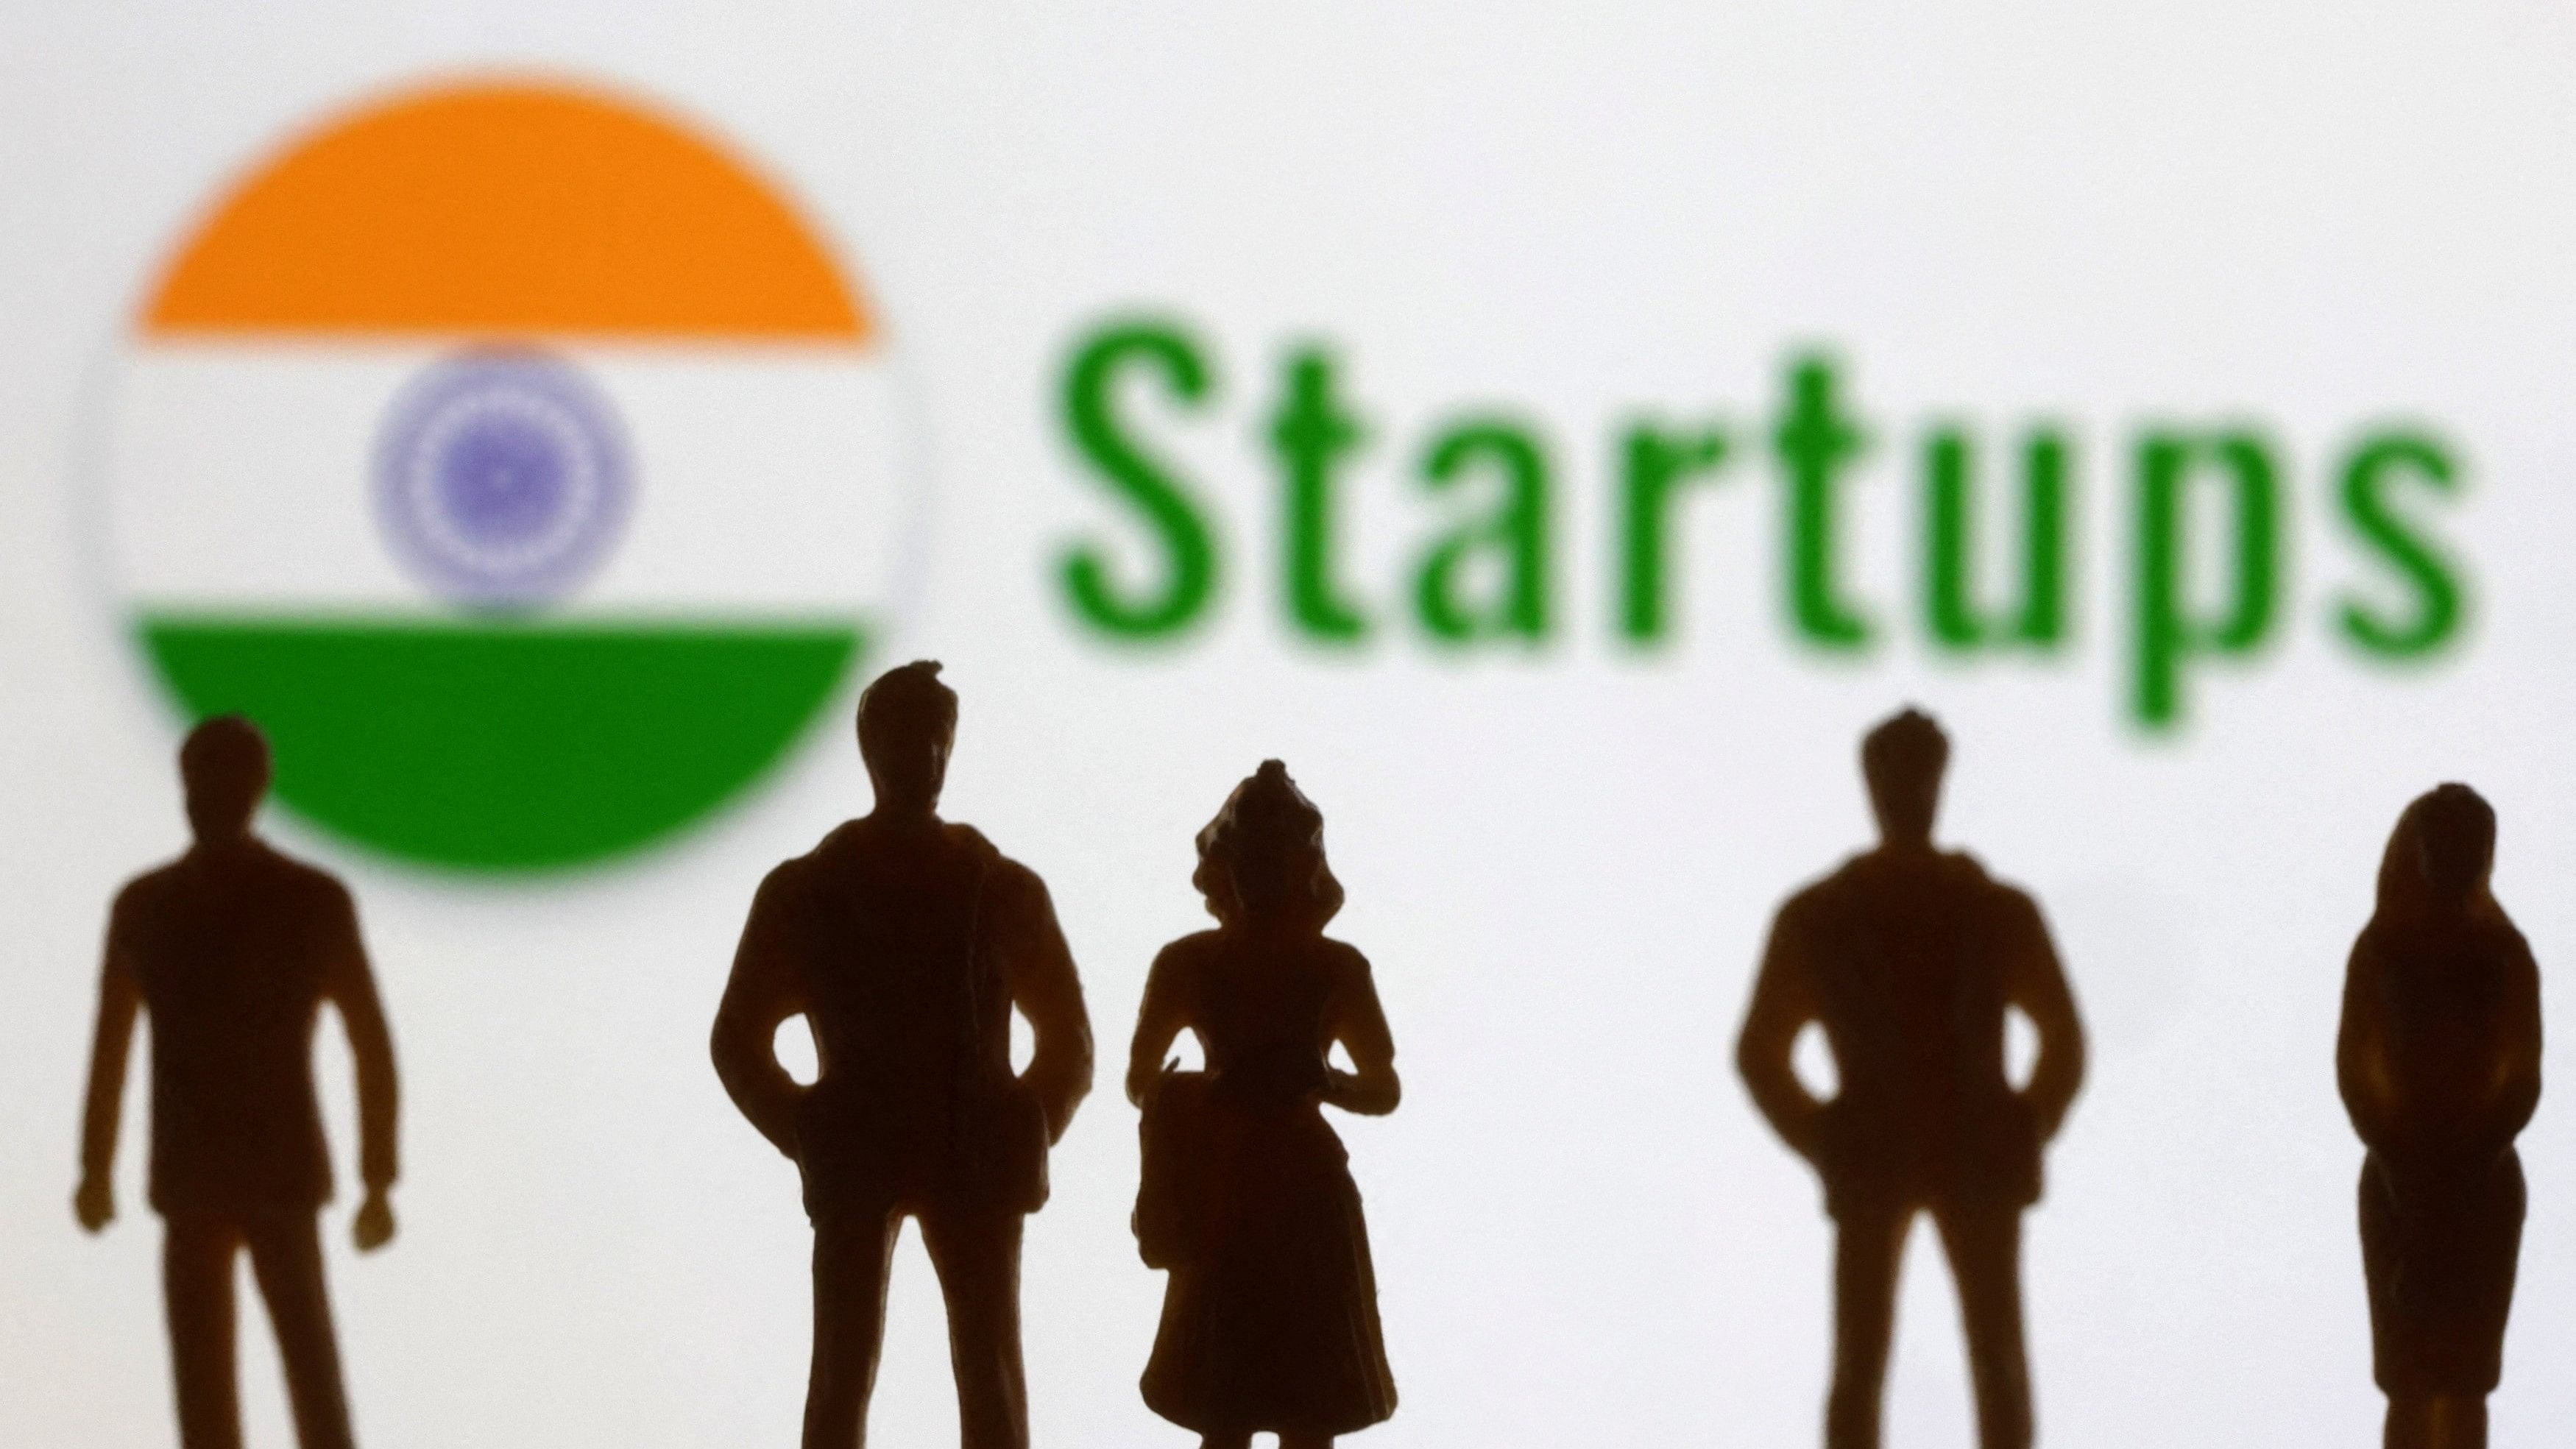 <div class="paragraphs"><p>Indian flag, people miniatures, and the word "Startups" are seen in this illustration.</p></div>